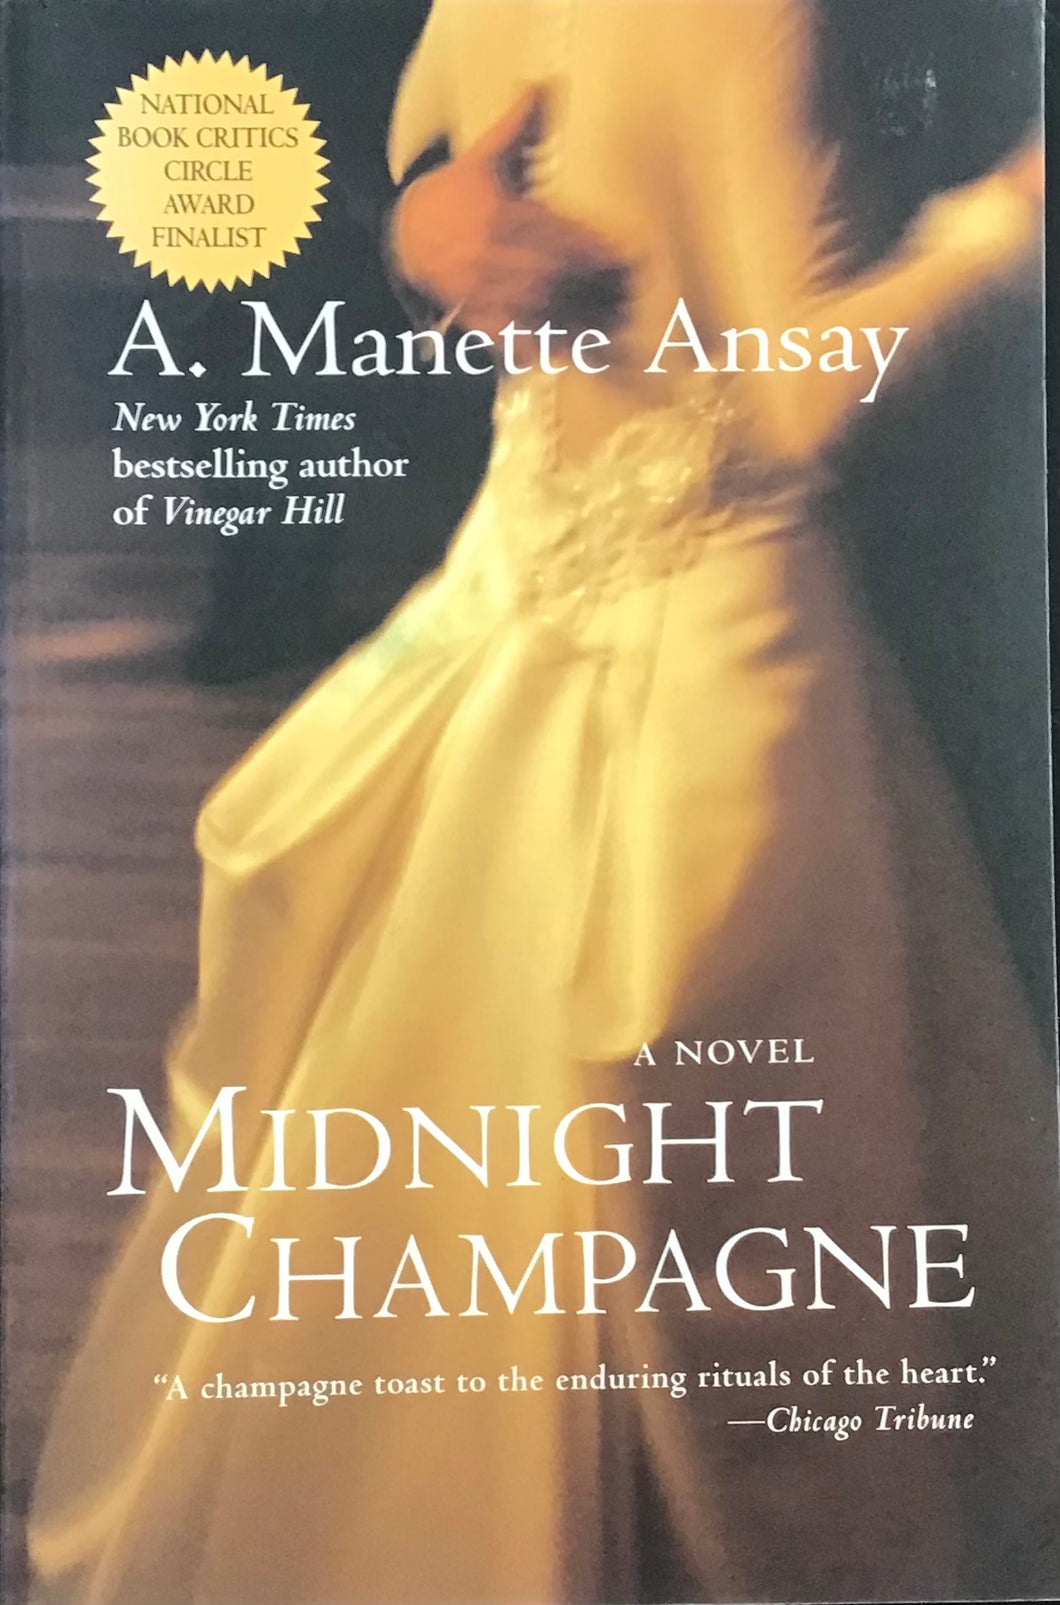 Midnight Champagne, A. Manette Ansay